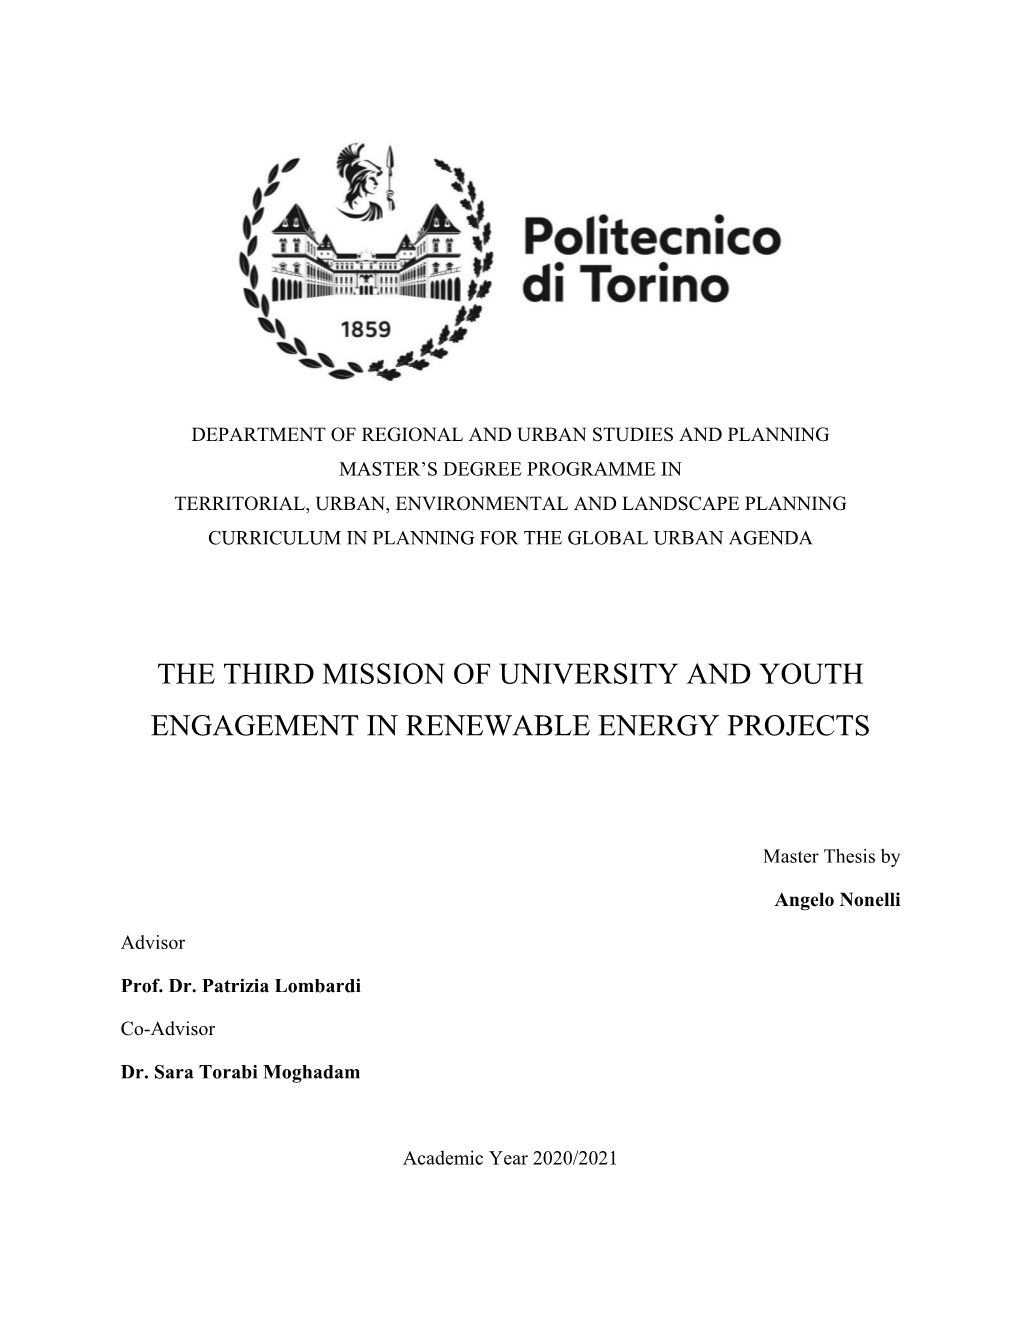 The Third Mission of University and Youth Engagement in Renewable Energy Projects